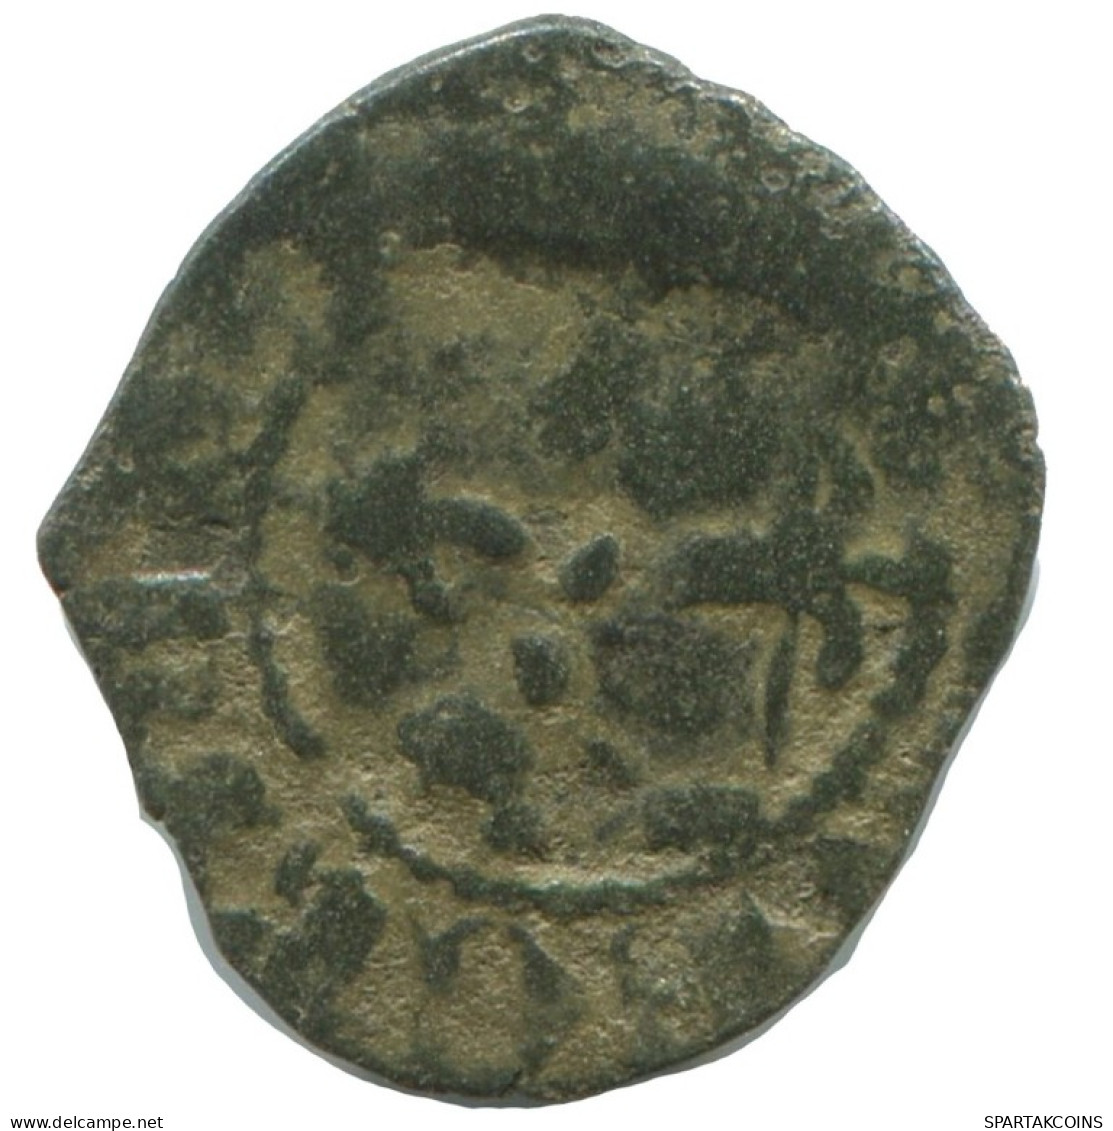 CRUSADER CROSS Authentic Original MEDIEVAL EUROPEAN Coin 0.6g/15mm #AC391.8.U.A - Other - Europe